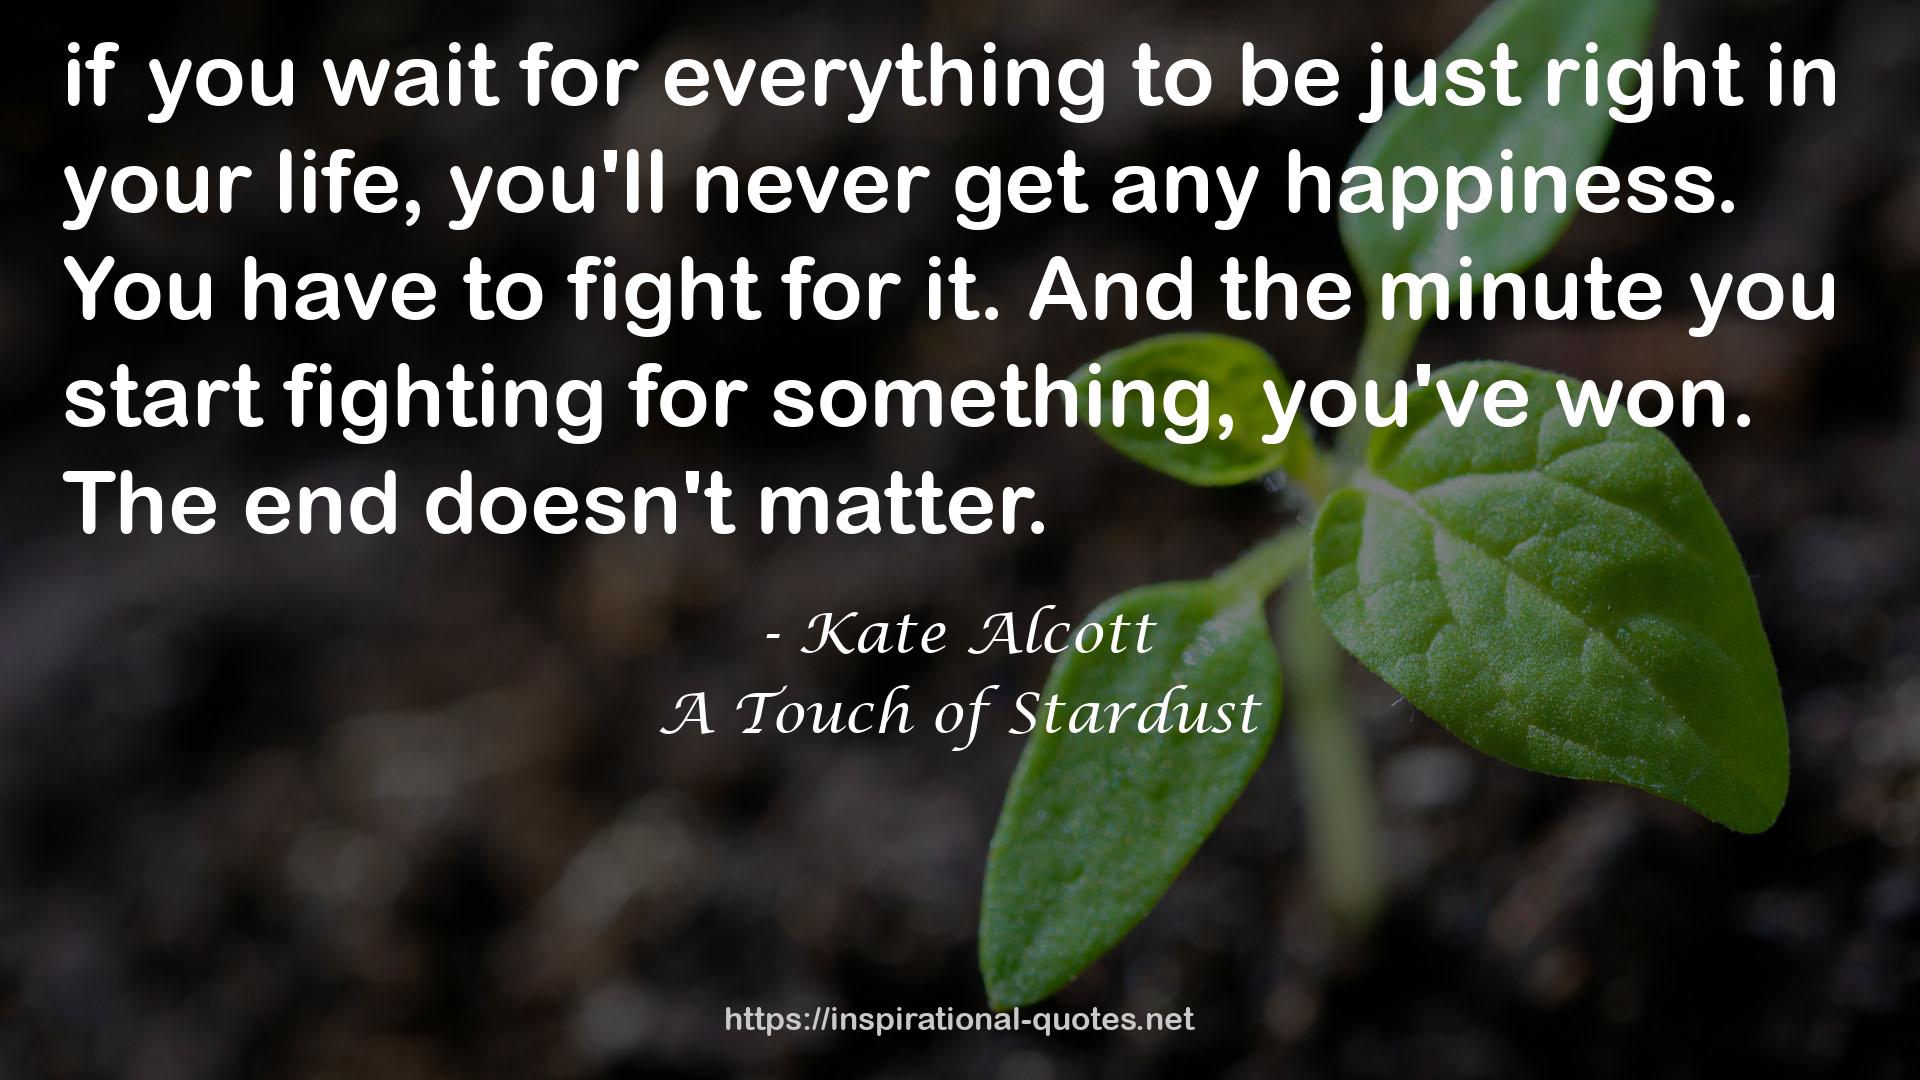 A Touch of Stardust QUOTES